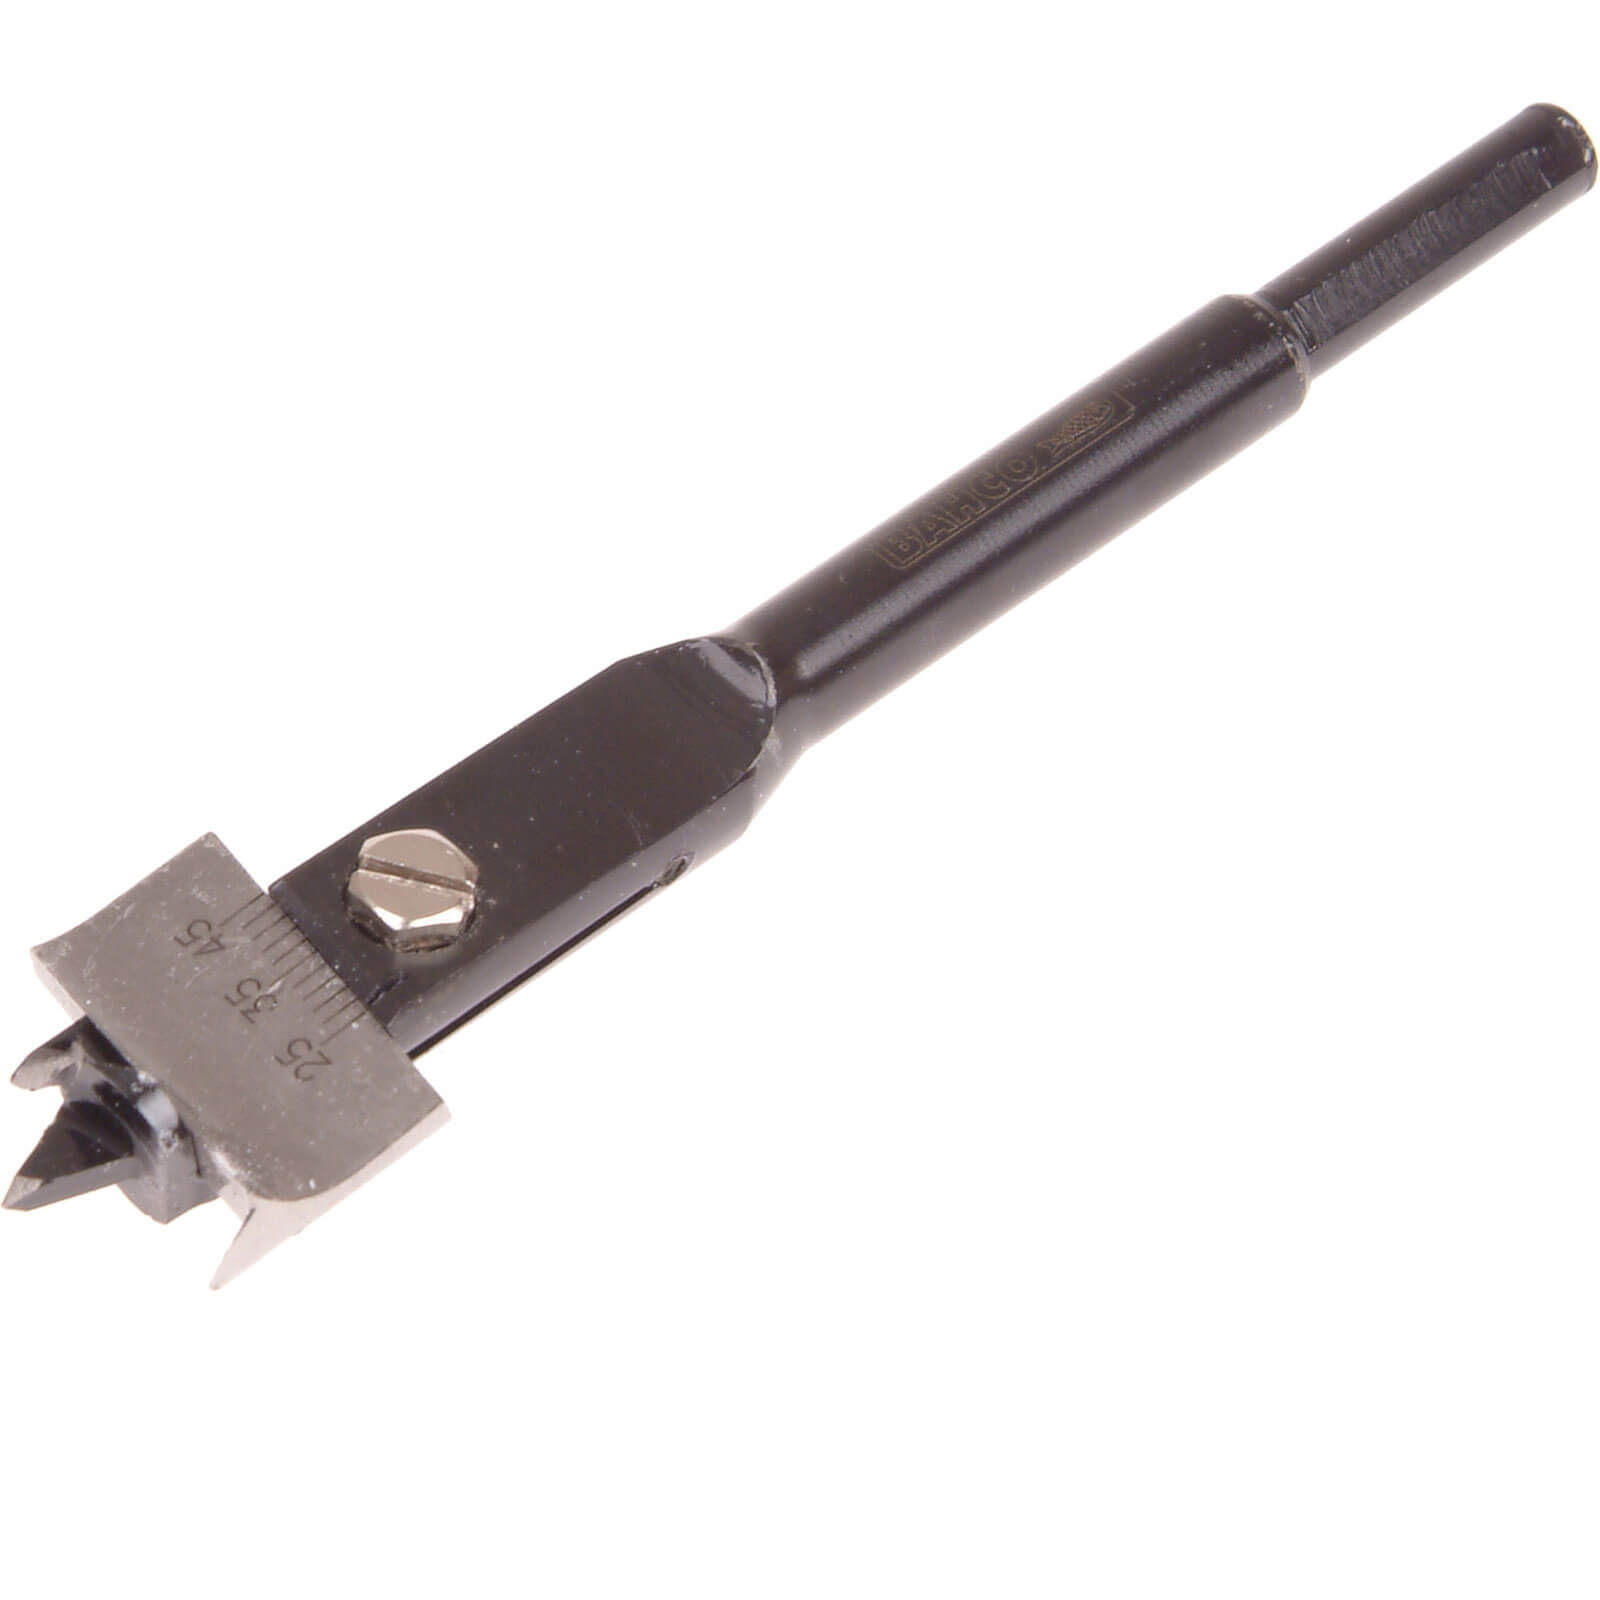 Photo of Bahco Adjustable Expanding Flat Drill Bit 22mm - 76mm